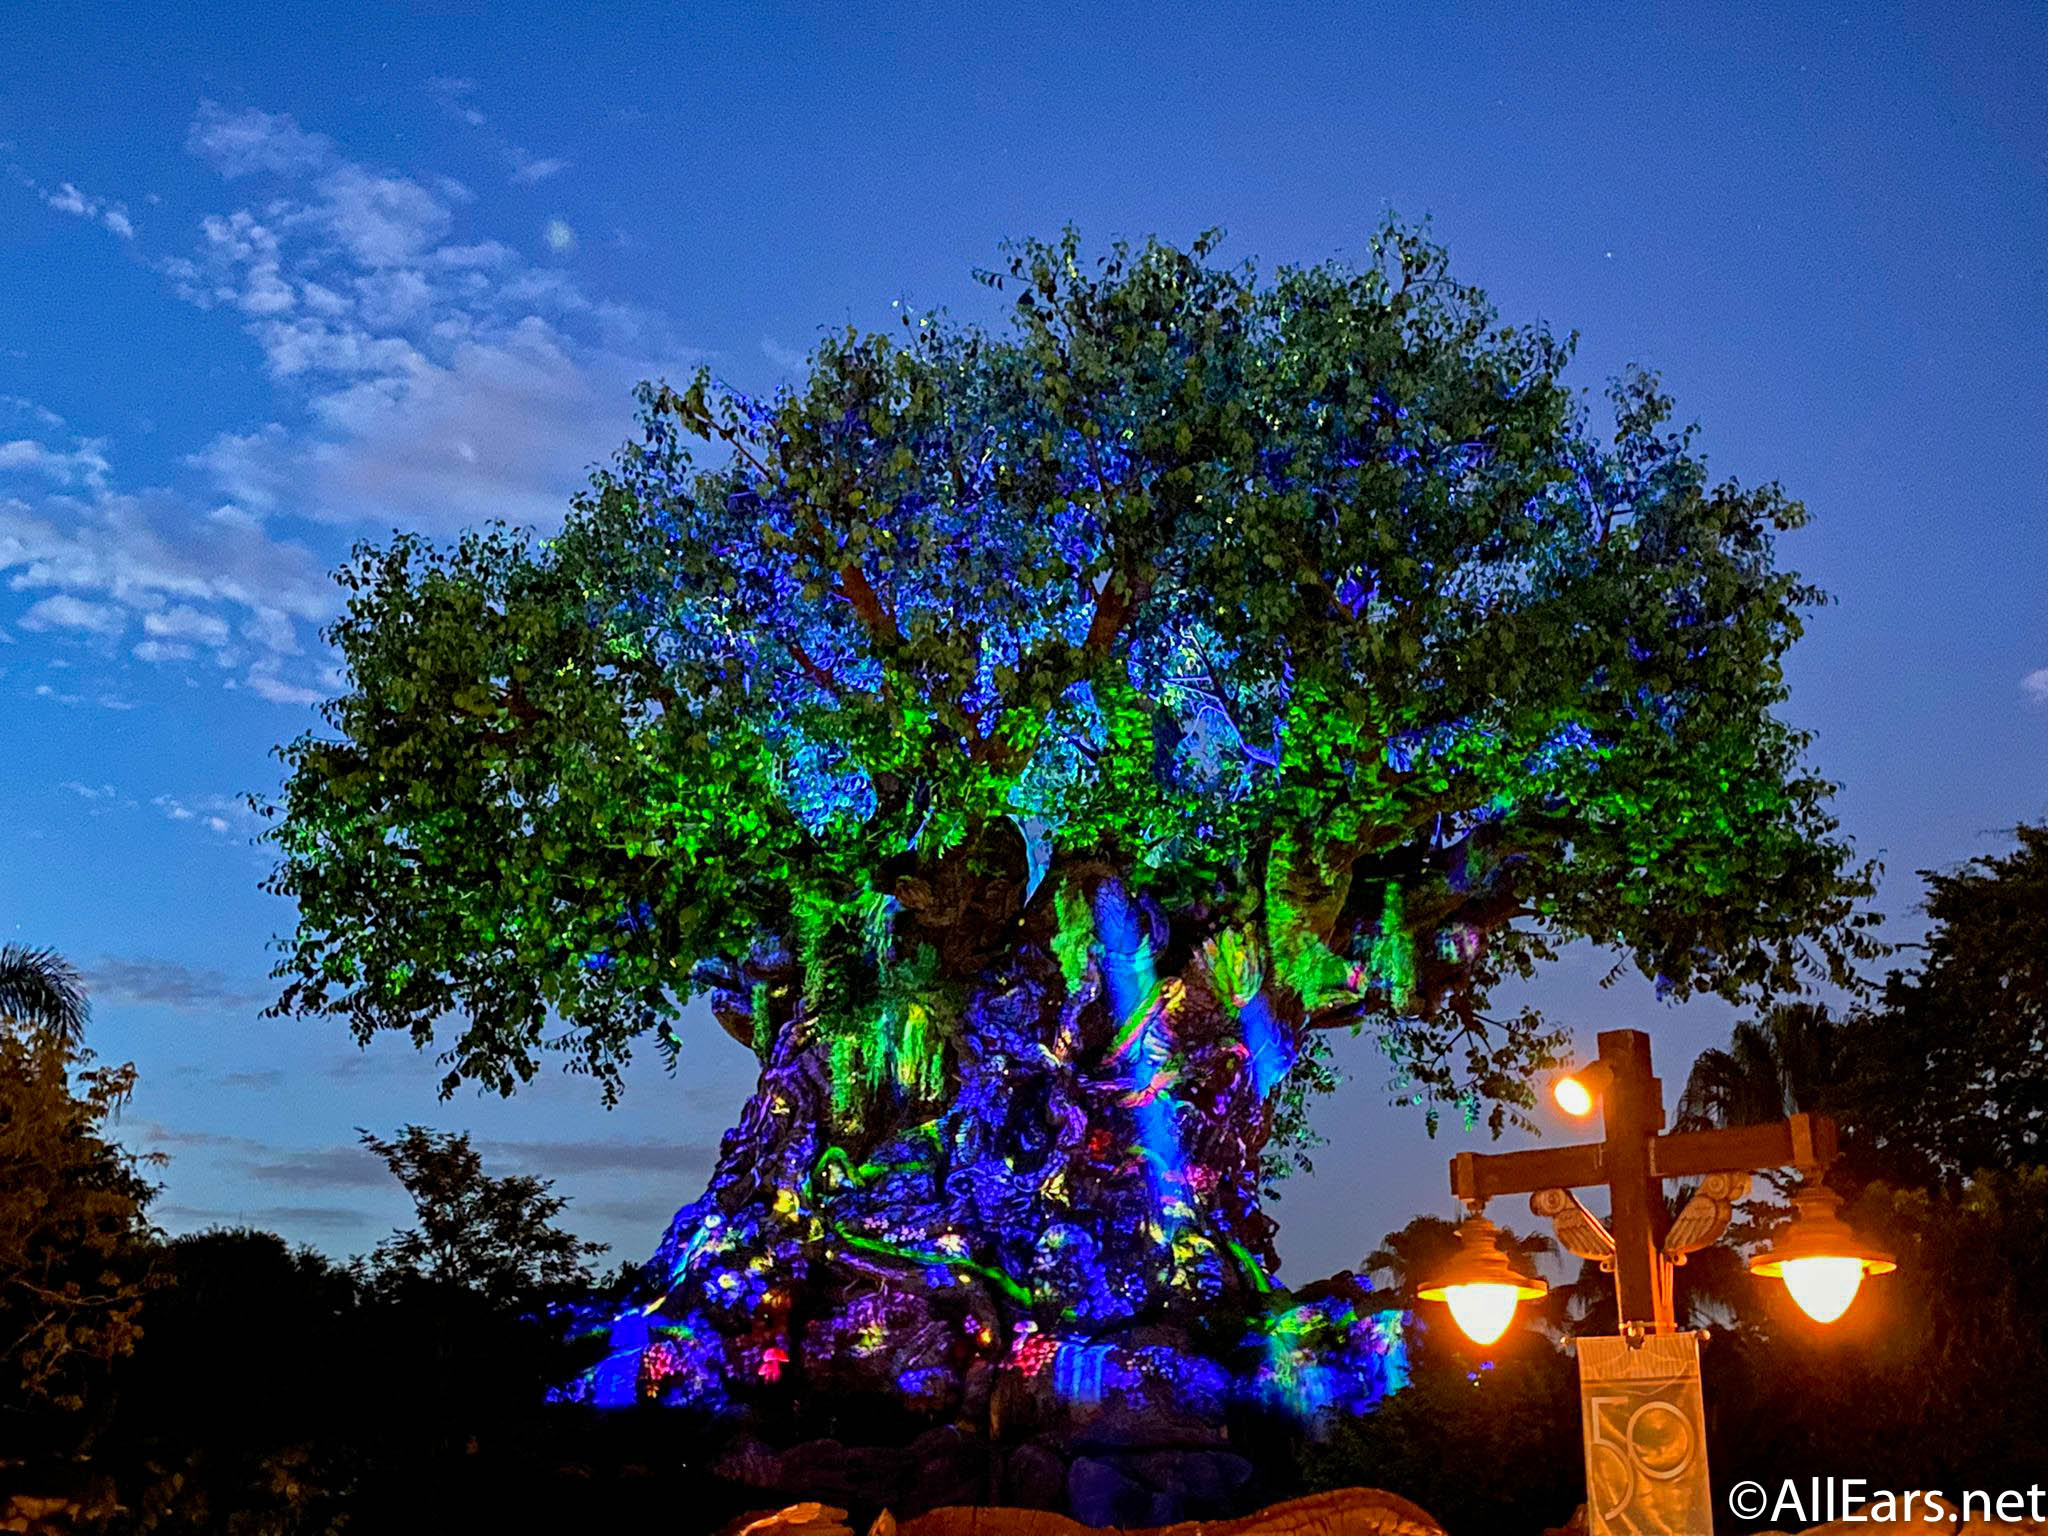 PHOTOS & VIDEO: Why You'll Want to Visit Disney's Animal Kingdom at NIGHT -  